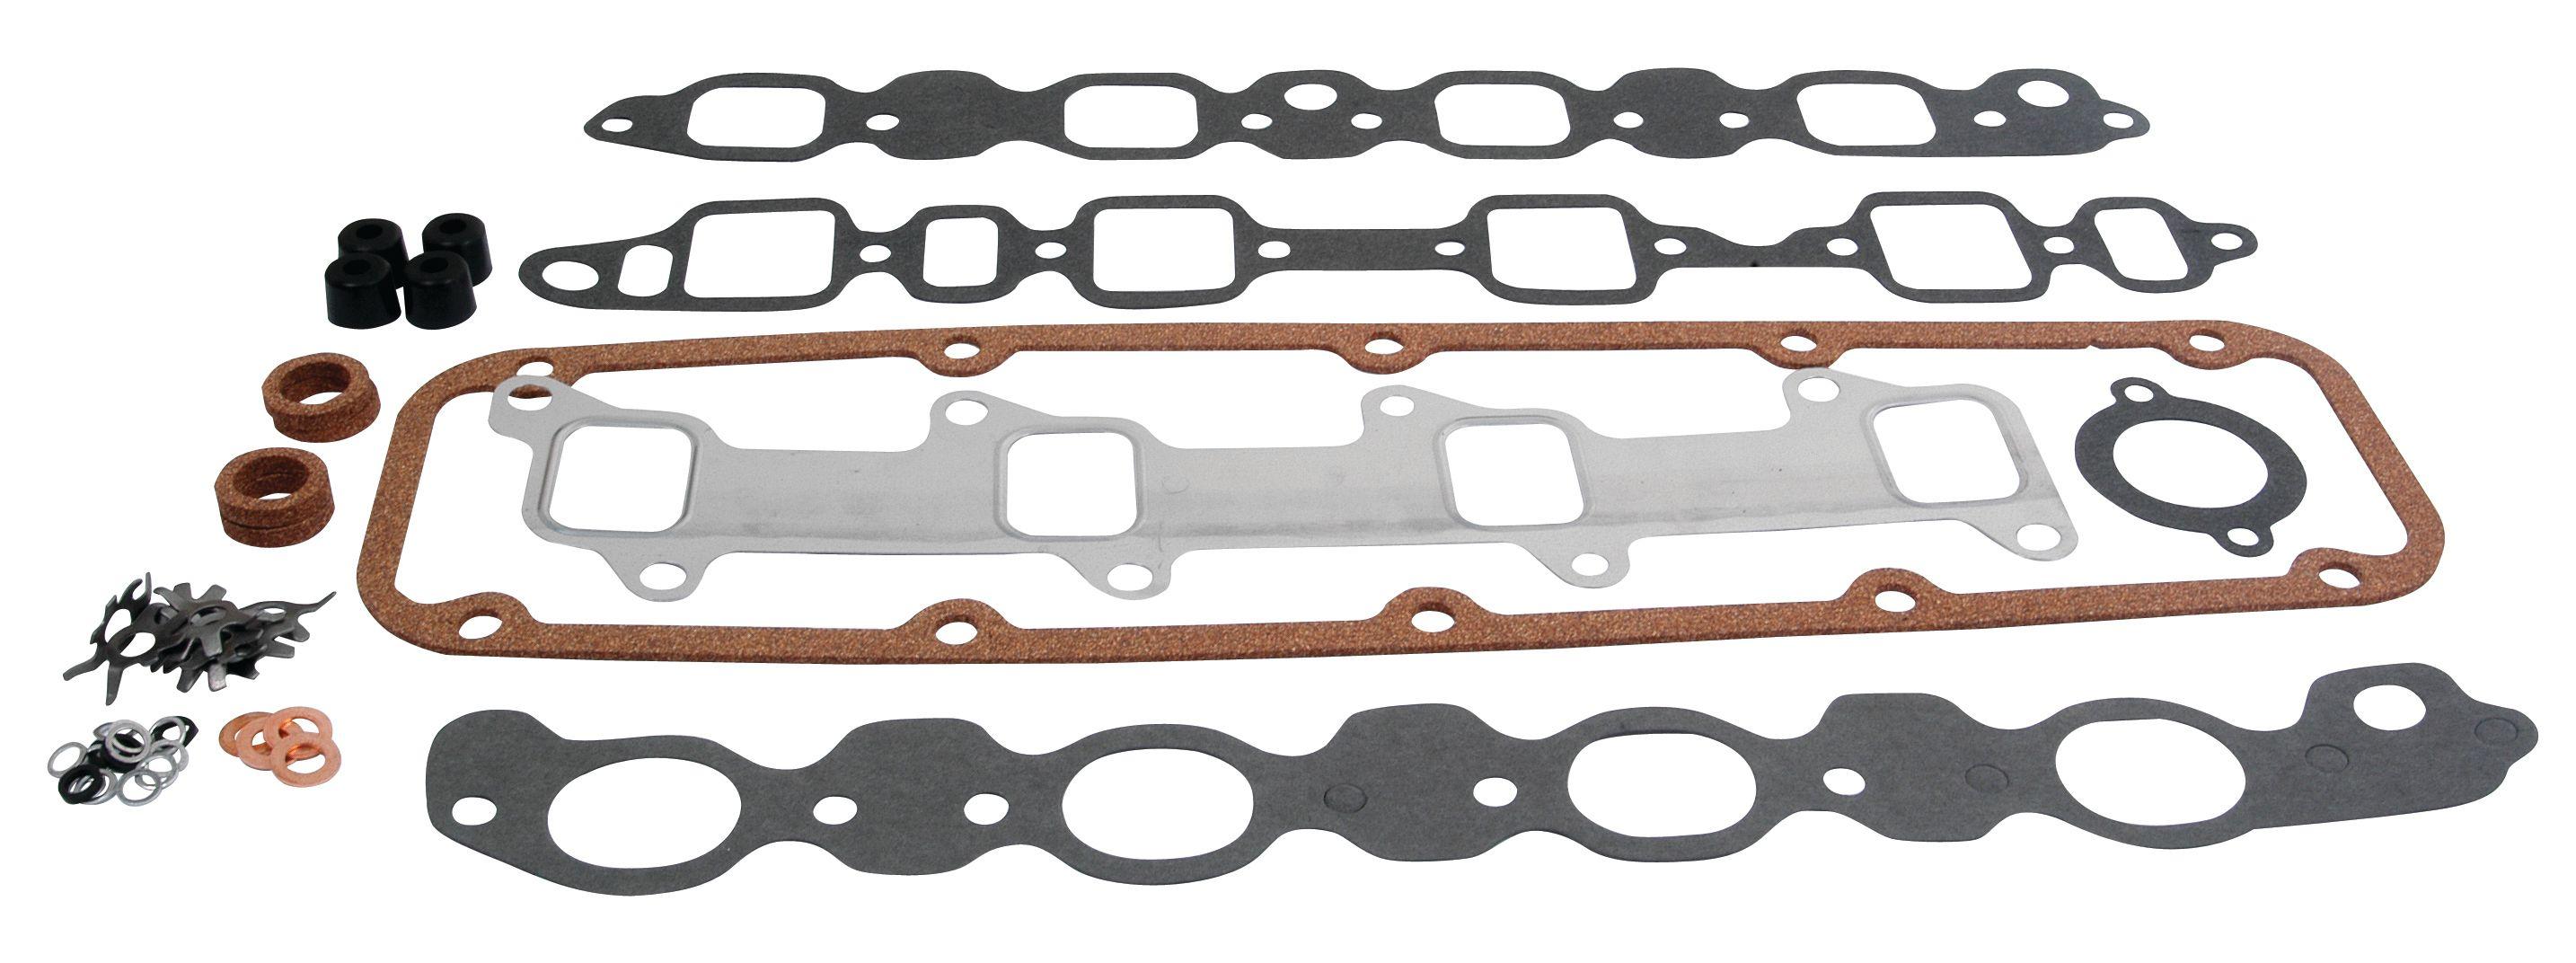 FORD NEW HOLLAND GASKET SET-HEAD SERVICE 65993